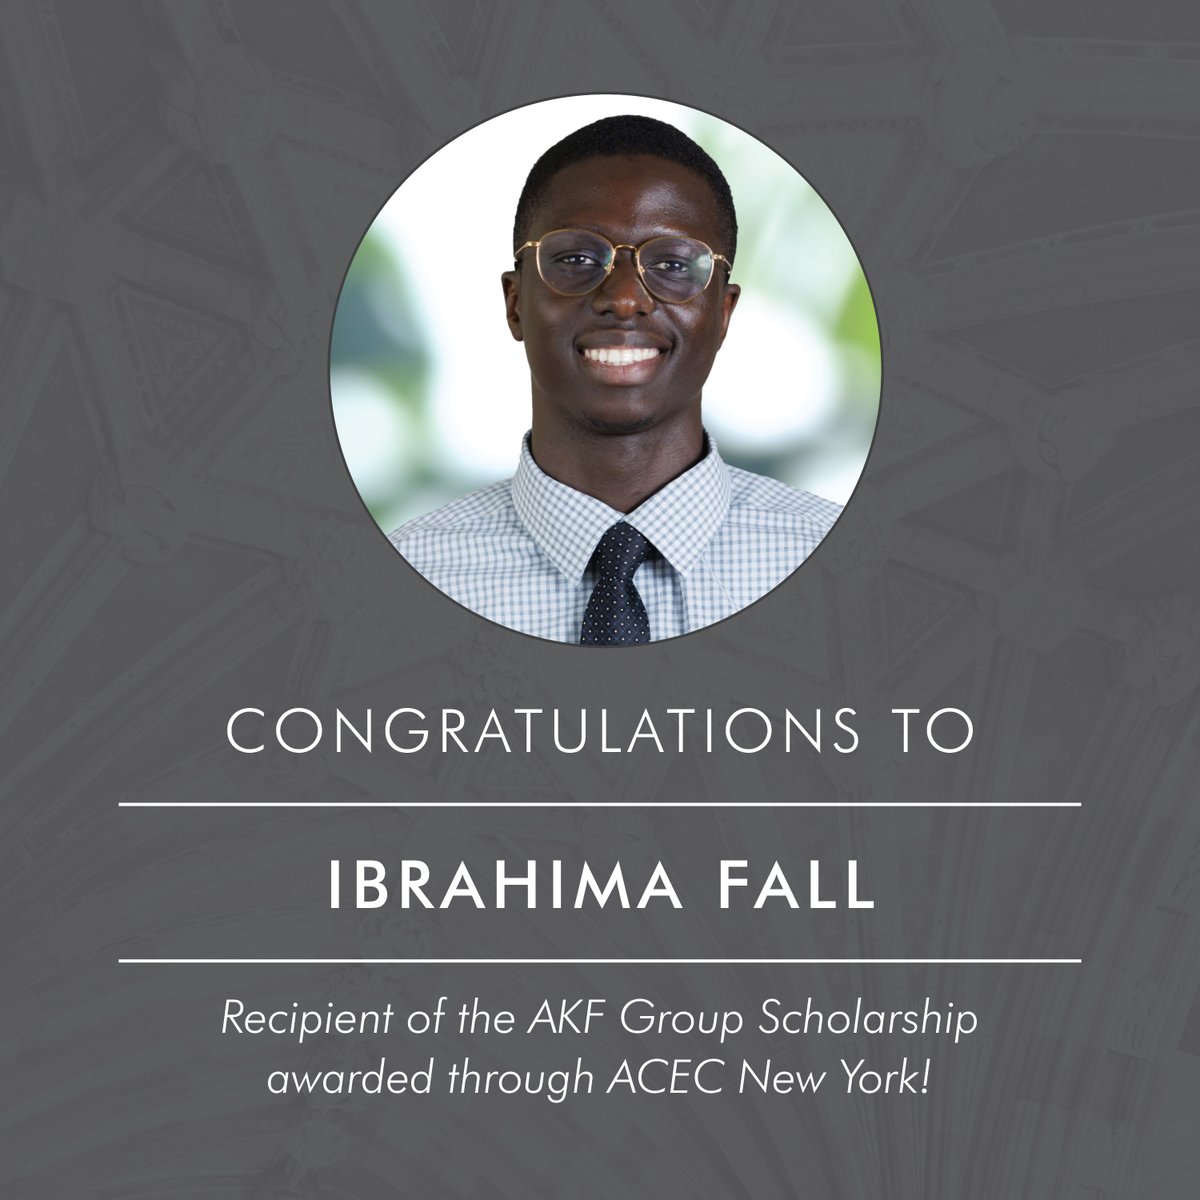 Congrats to Ibrahima Fall, recipient of the AKF #Scholarship awarded through @ACECNewYork. Ibrahima is a @CityCollegeNY student & President of Structural Engineers Association of New York CCNY chapter. Excited to see what the future holds for Ibrahima! #EmpoweringHumanPotential